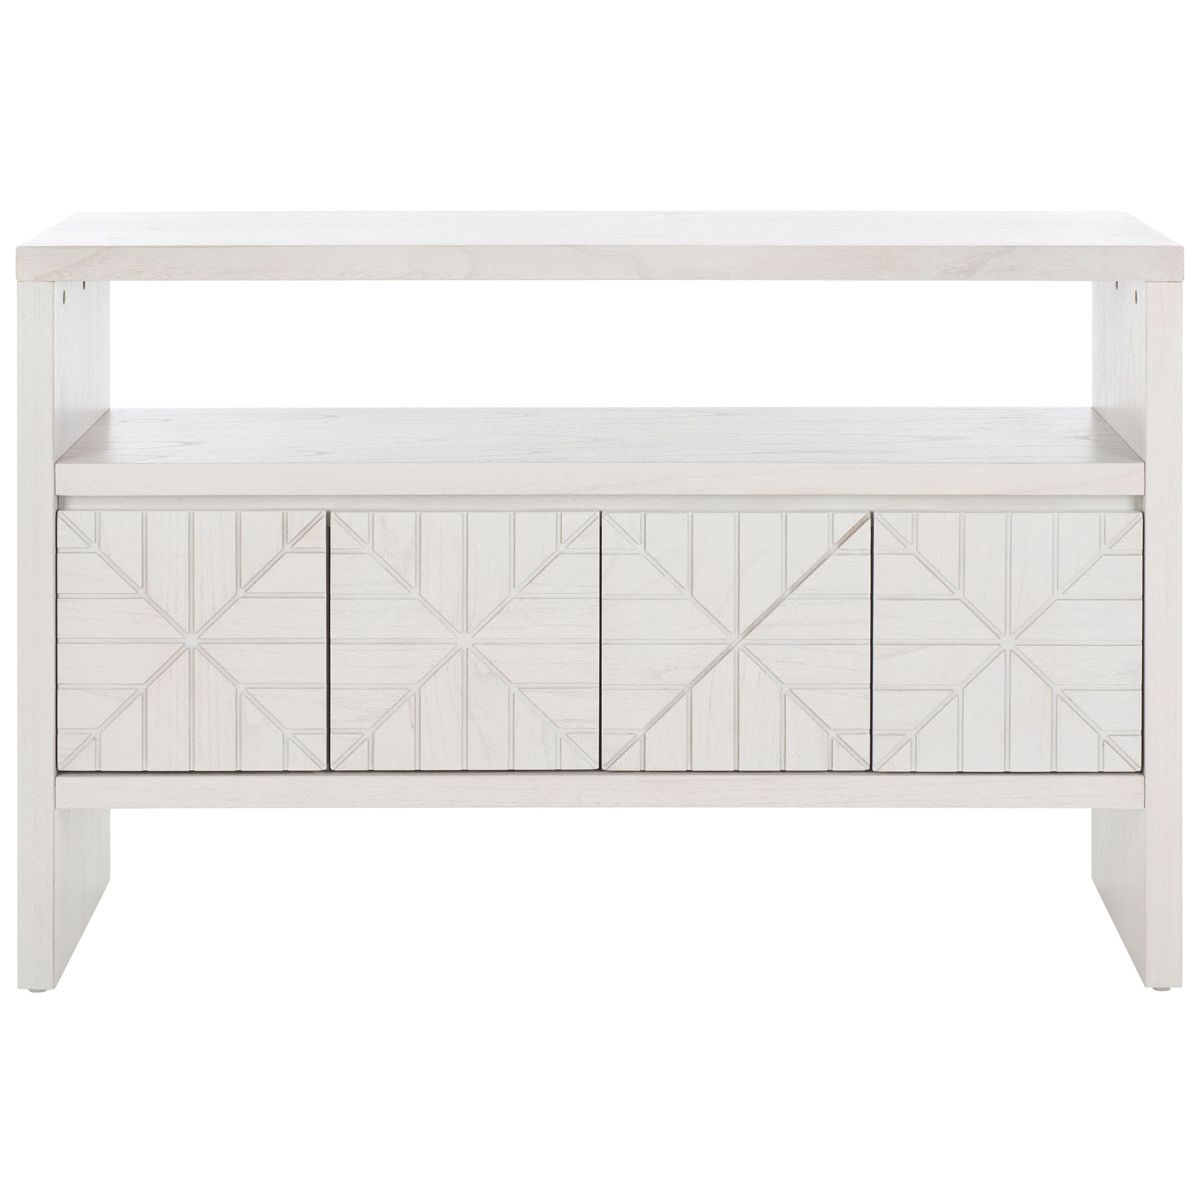 Safavieh Zella 4 Door Console Table, White Washed